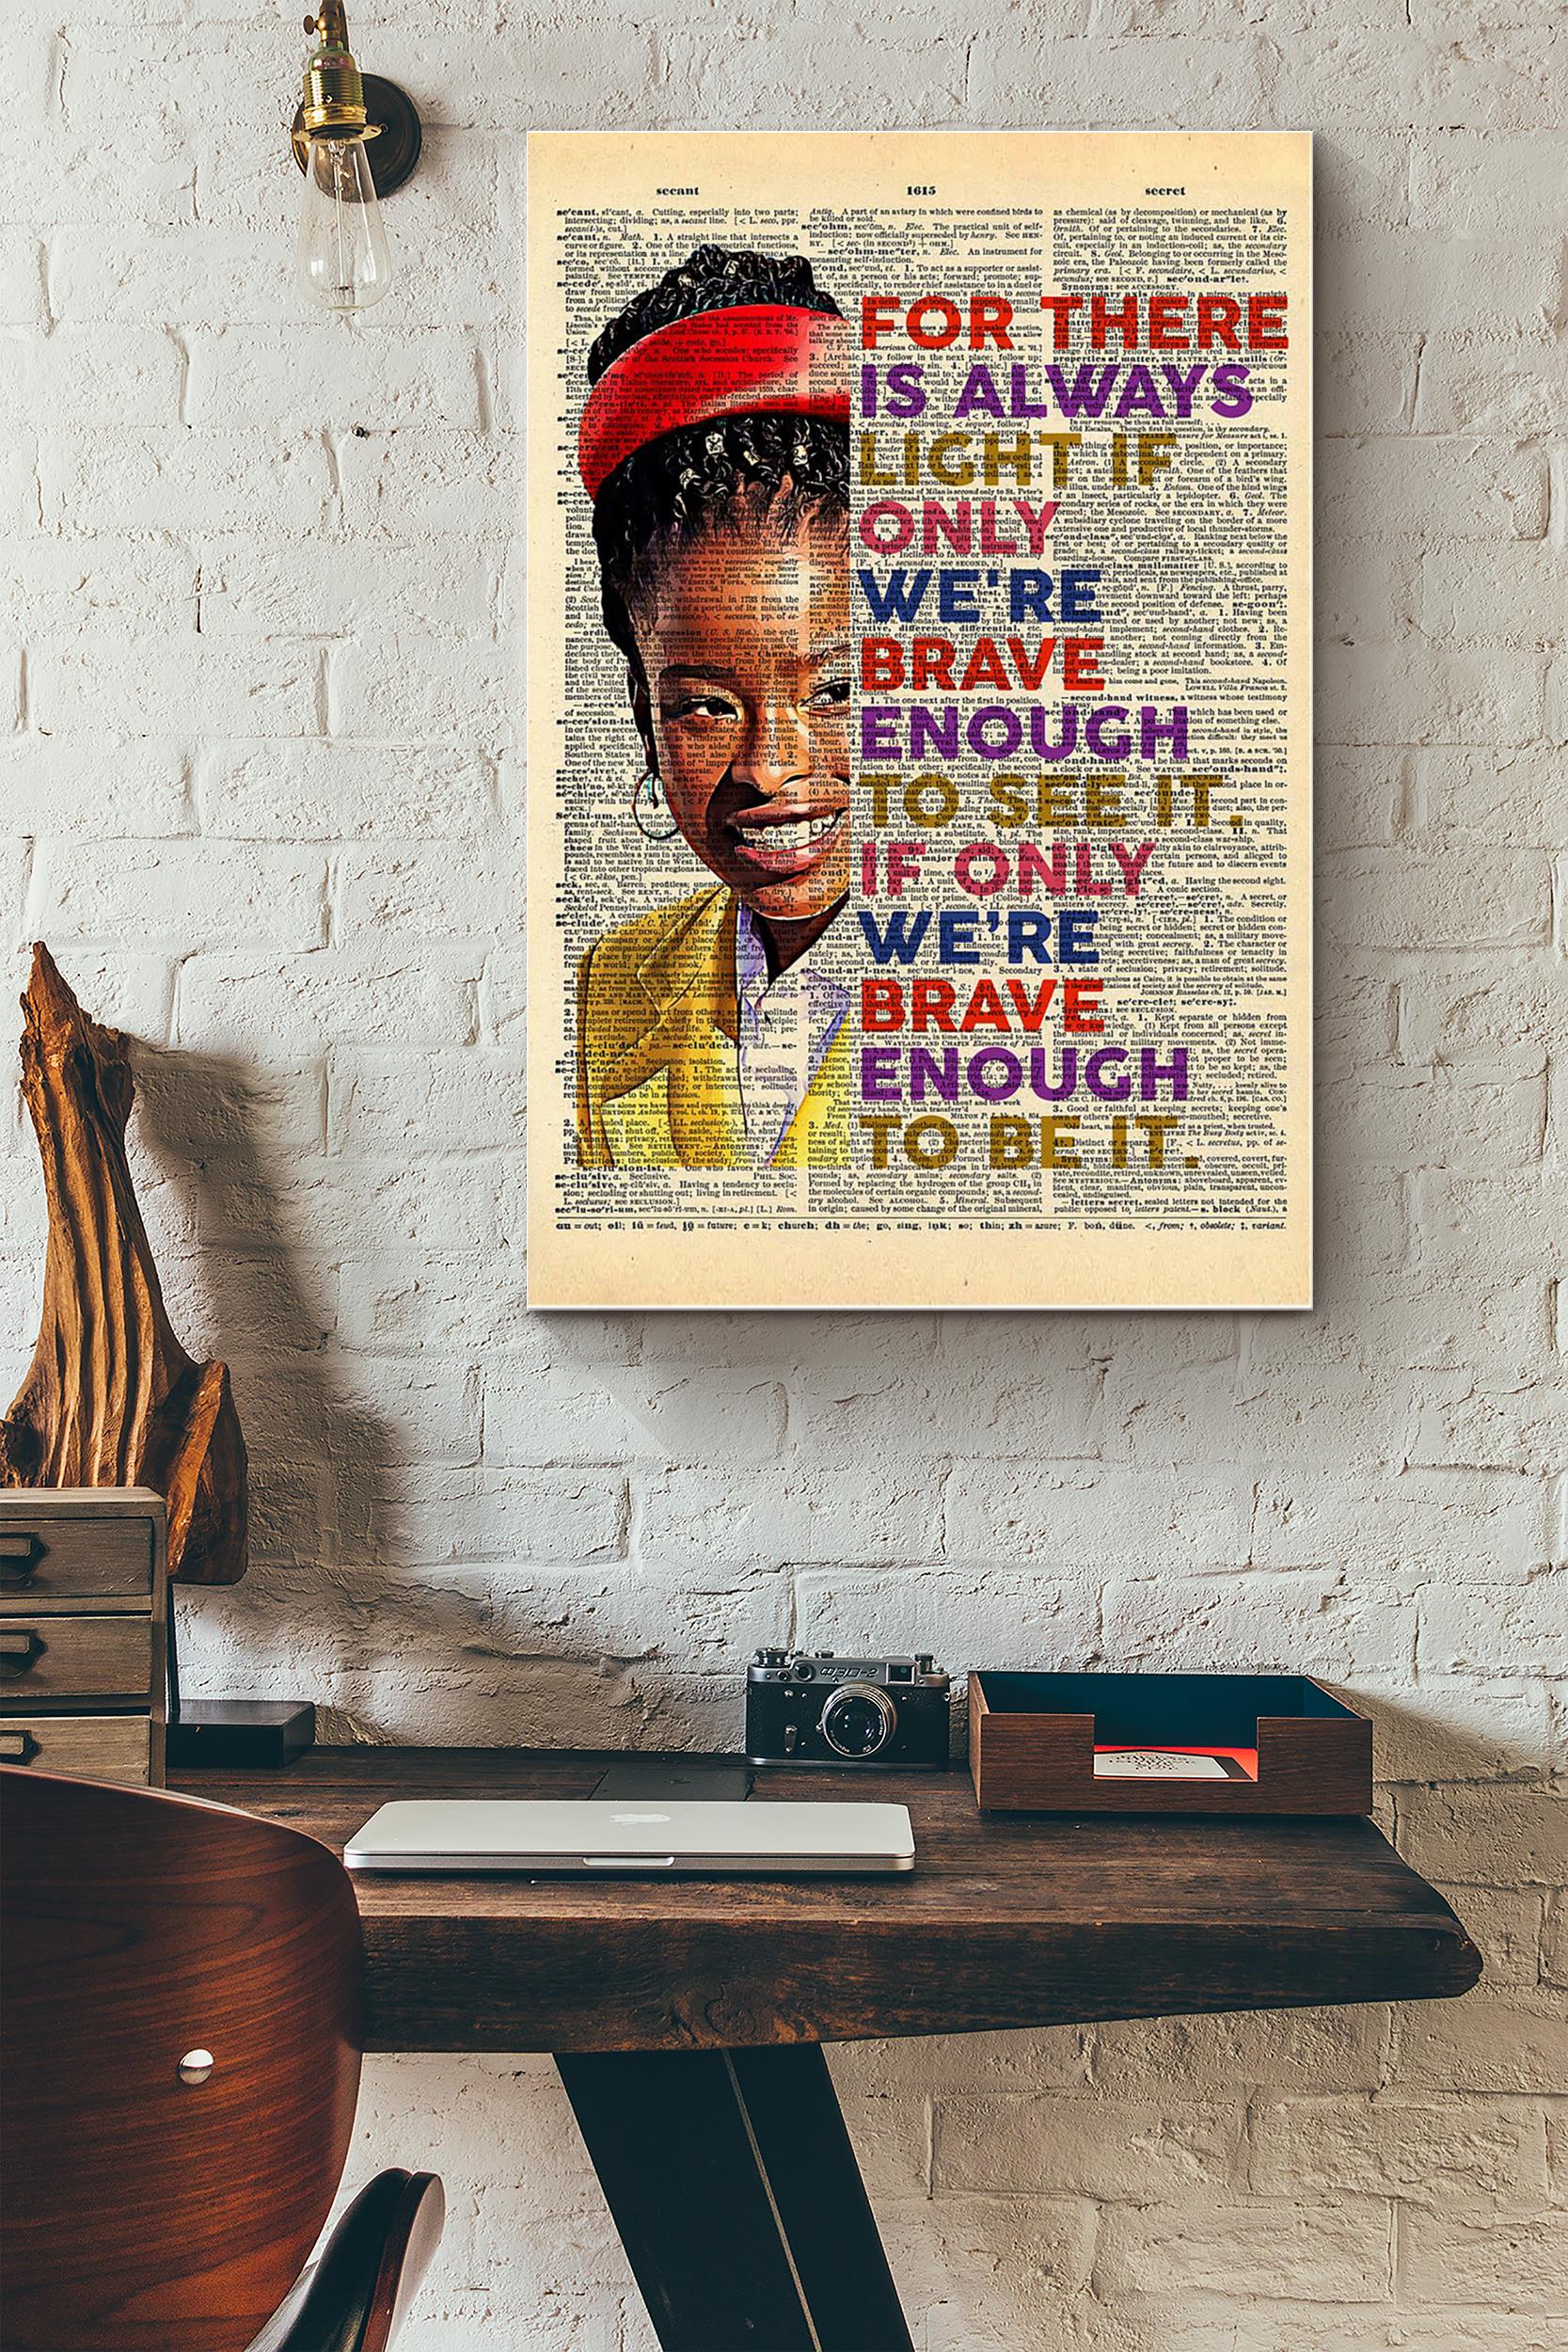 Amanda Gorman There Is Always Light Amanda Gorman Inauguration 21 Poem Poster From Aeticon Trending Designs Store Aeticon